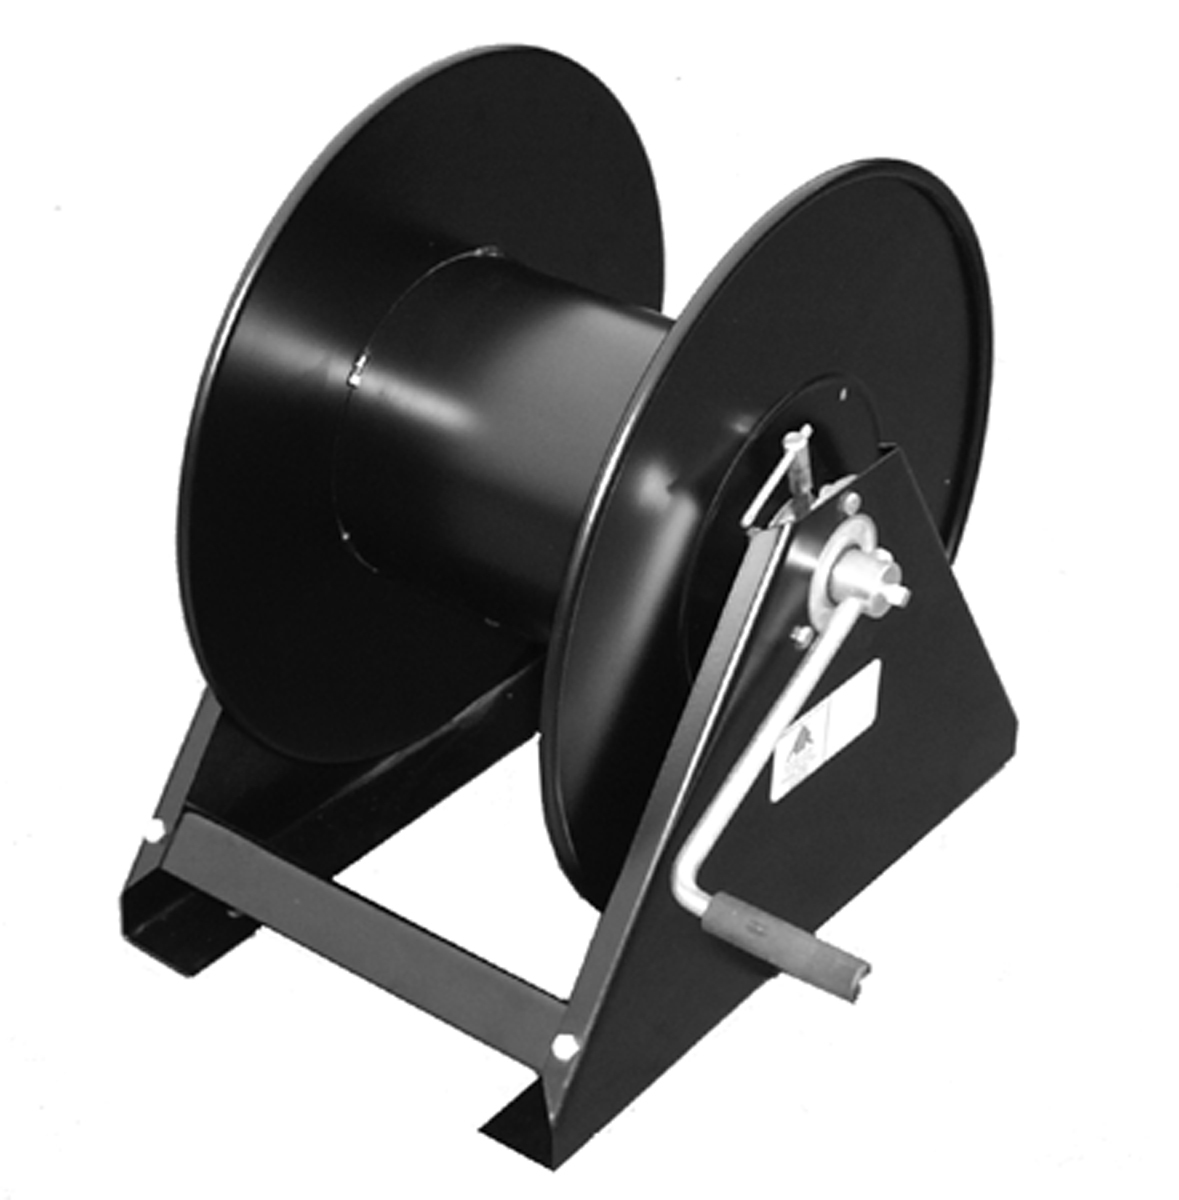 Air Systems International Air Hose Reel For Supplied Air Respirator (Availability restrictions apply.)